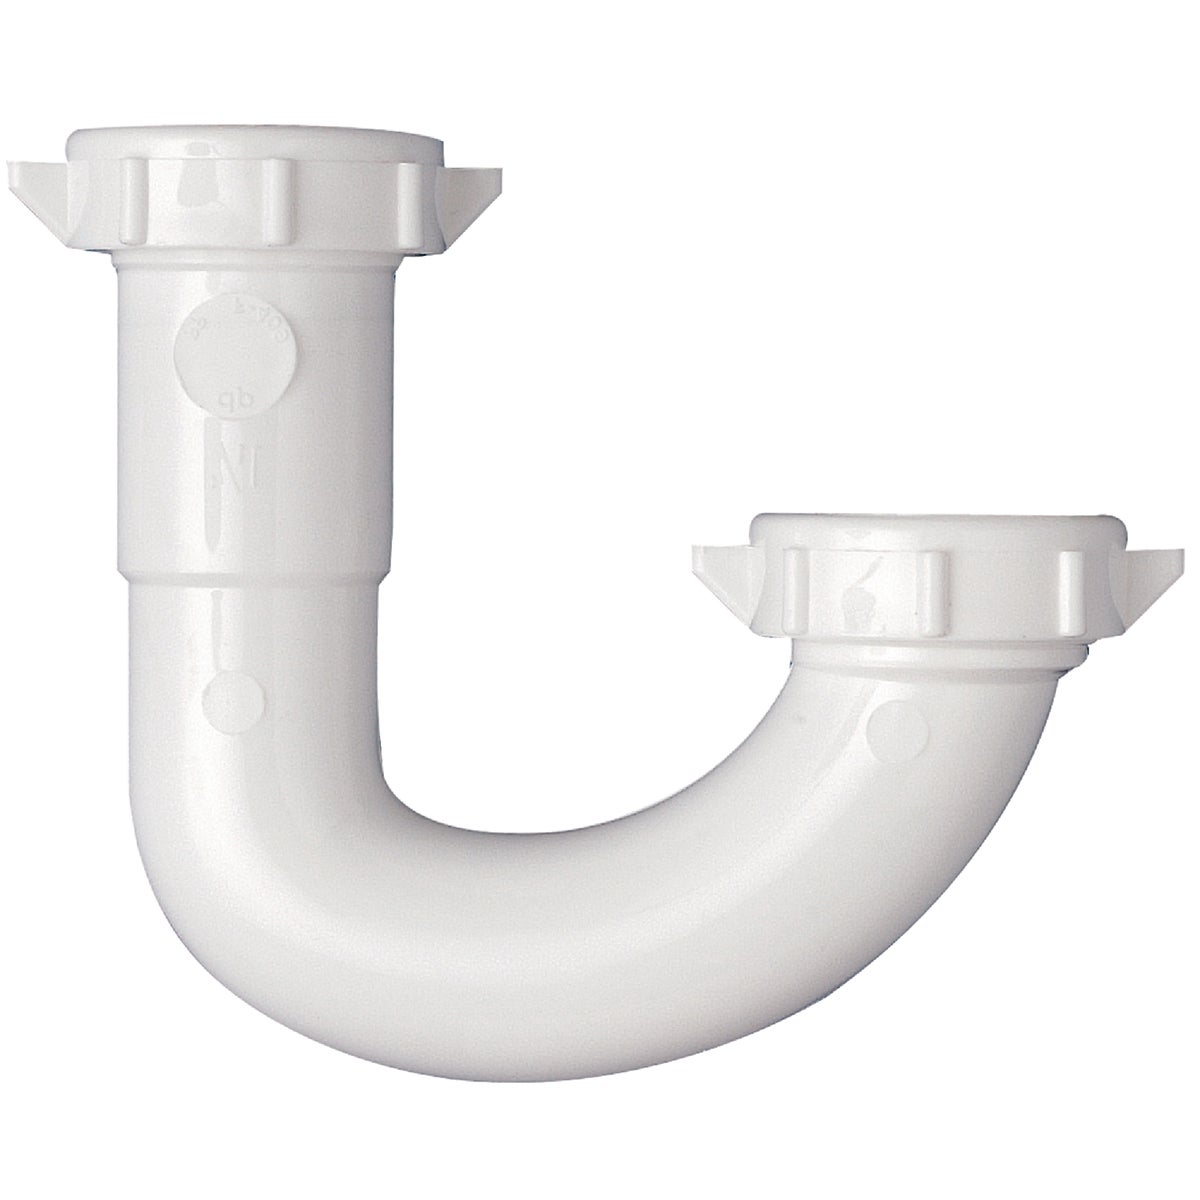 Item 448451, Plastic J-Bend is made using durable polypropylene plastic and is ideal for